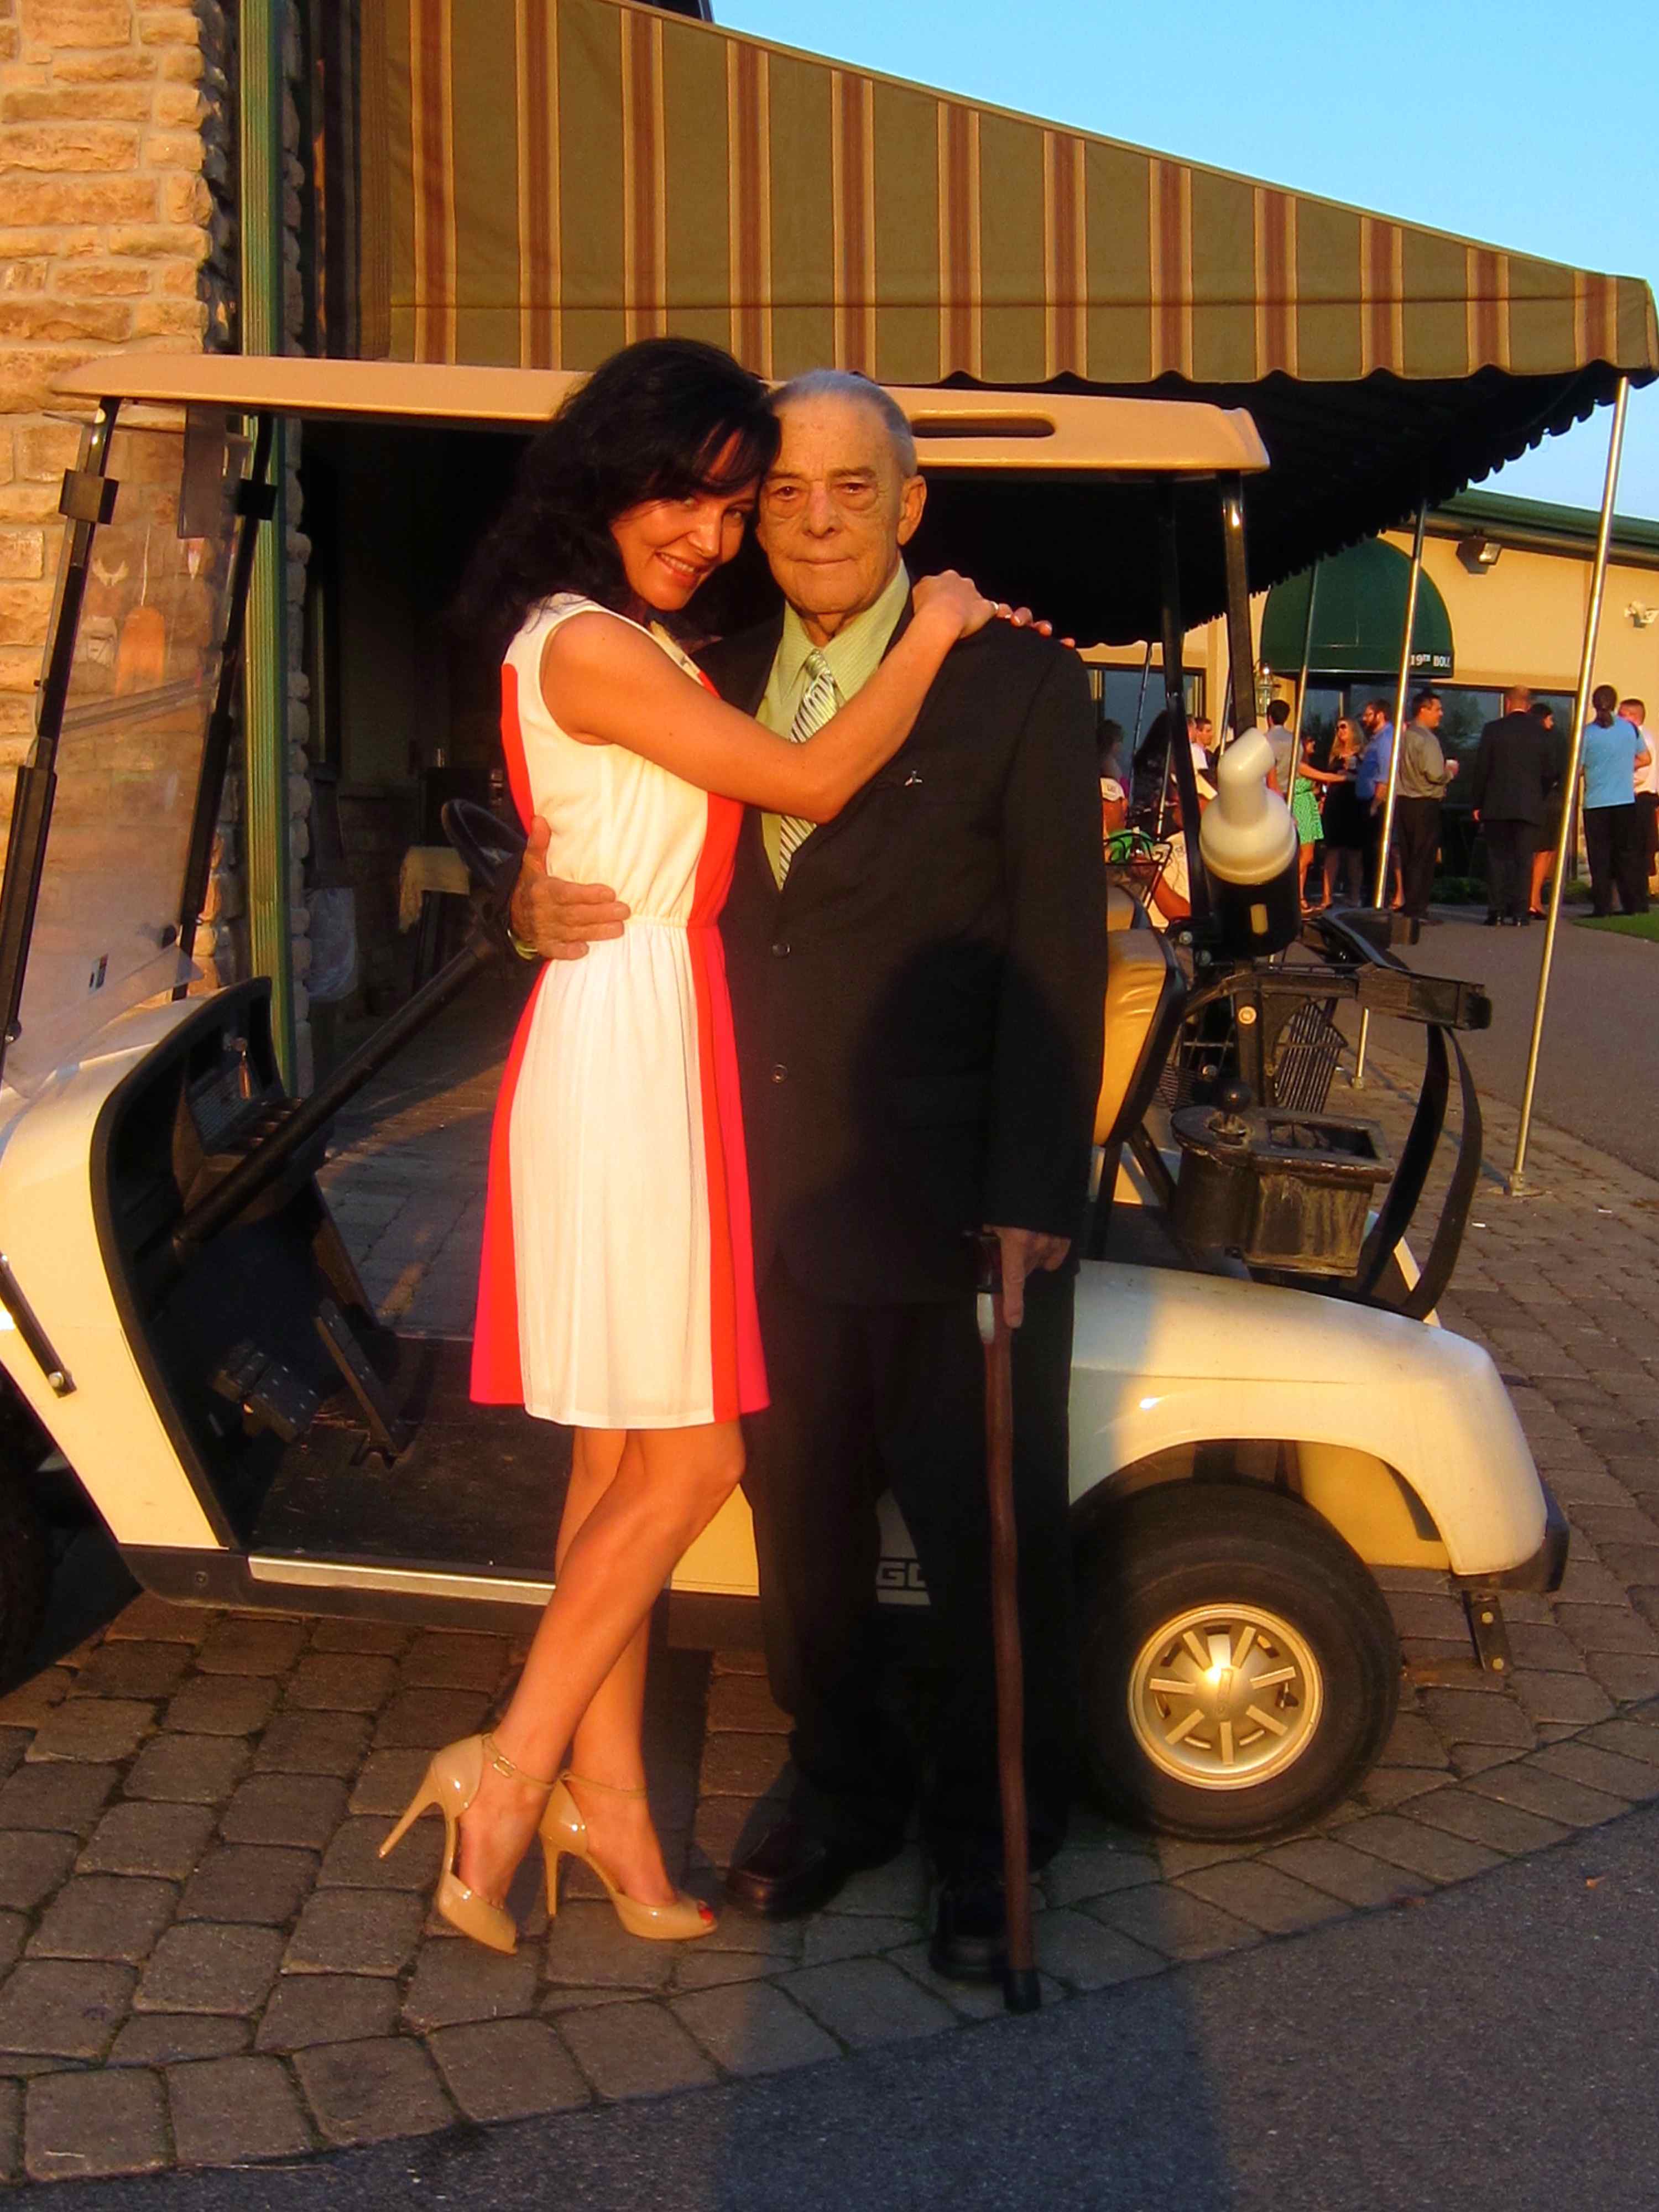 Gina Aponte' and the greatest man she has ever known, her Pop-Pop. God rest his soul. With her forever.